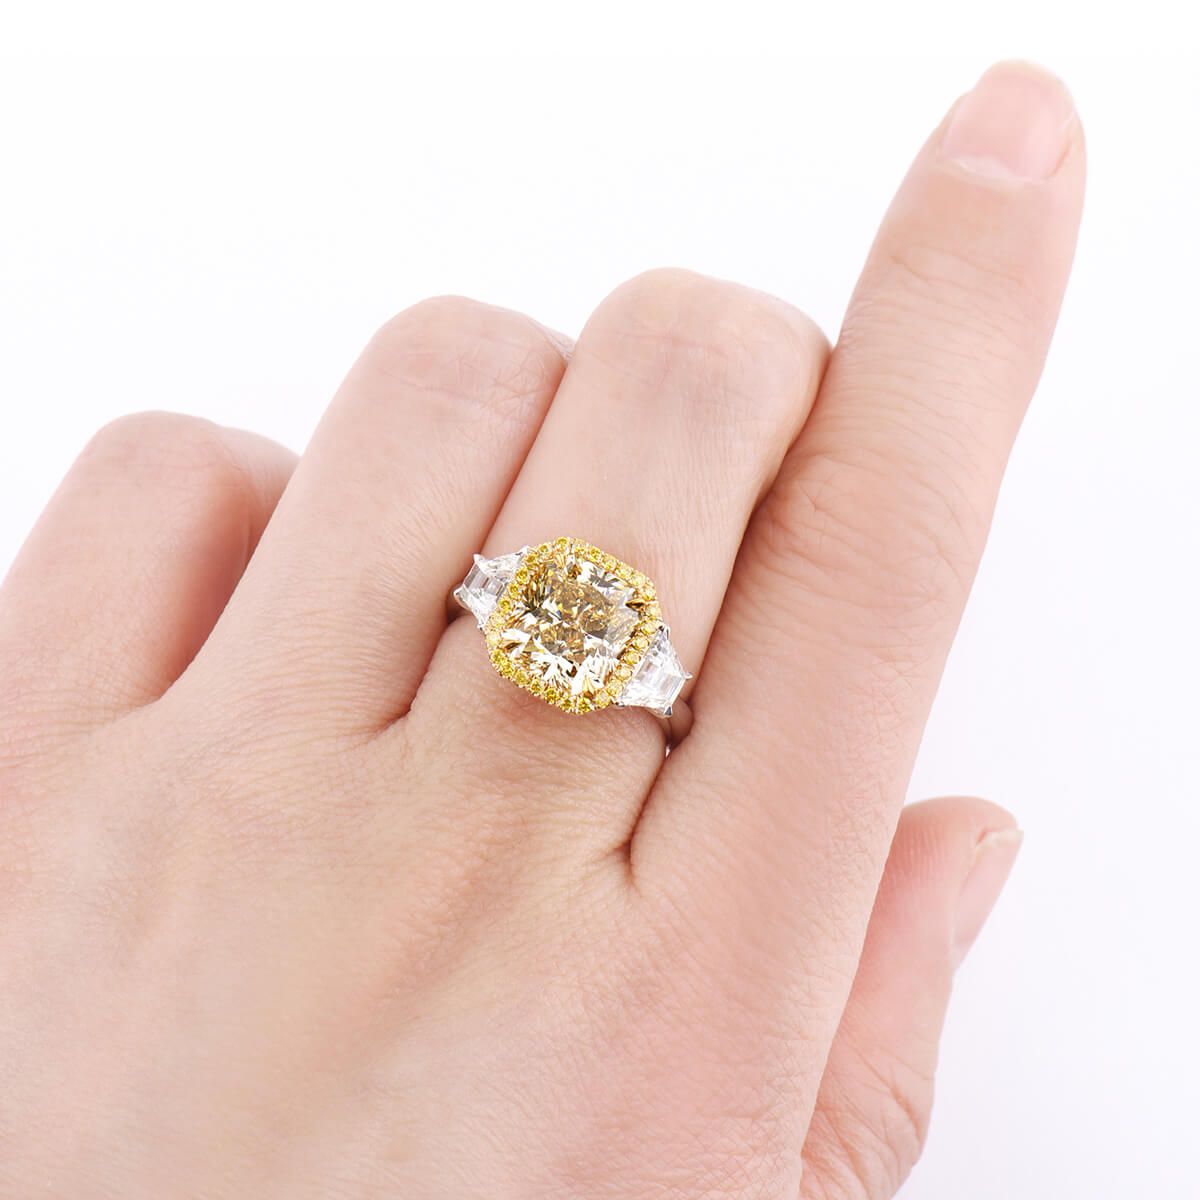 Fancy Yellow Diamond Ring, 3.33 Ct. (4.39 Ct. TW), Radiant shape, GIA Certified, 1182682311